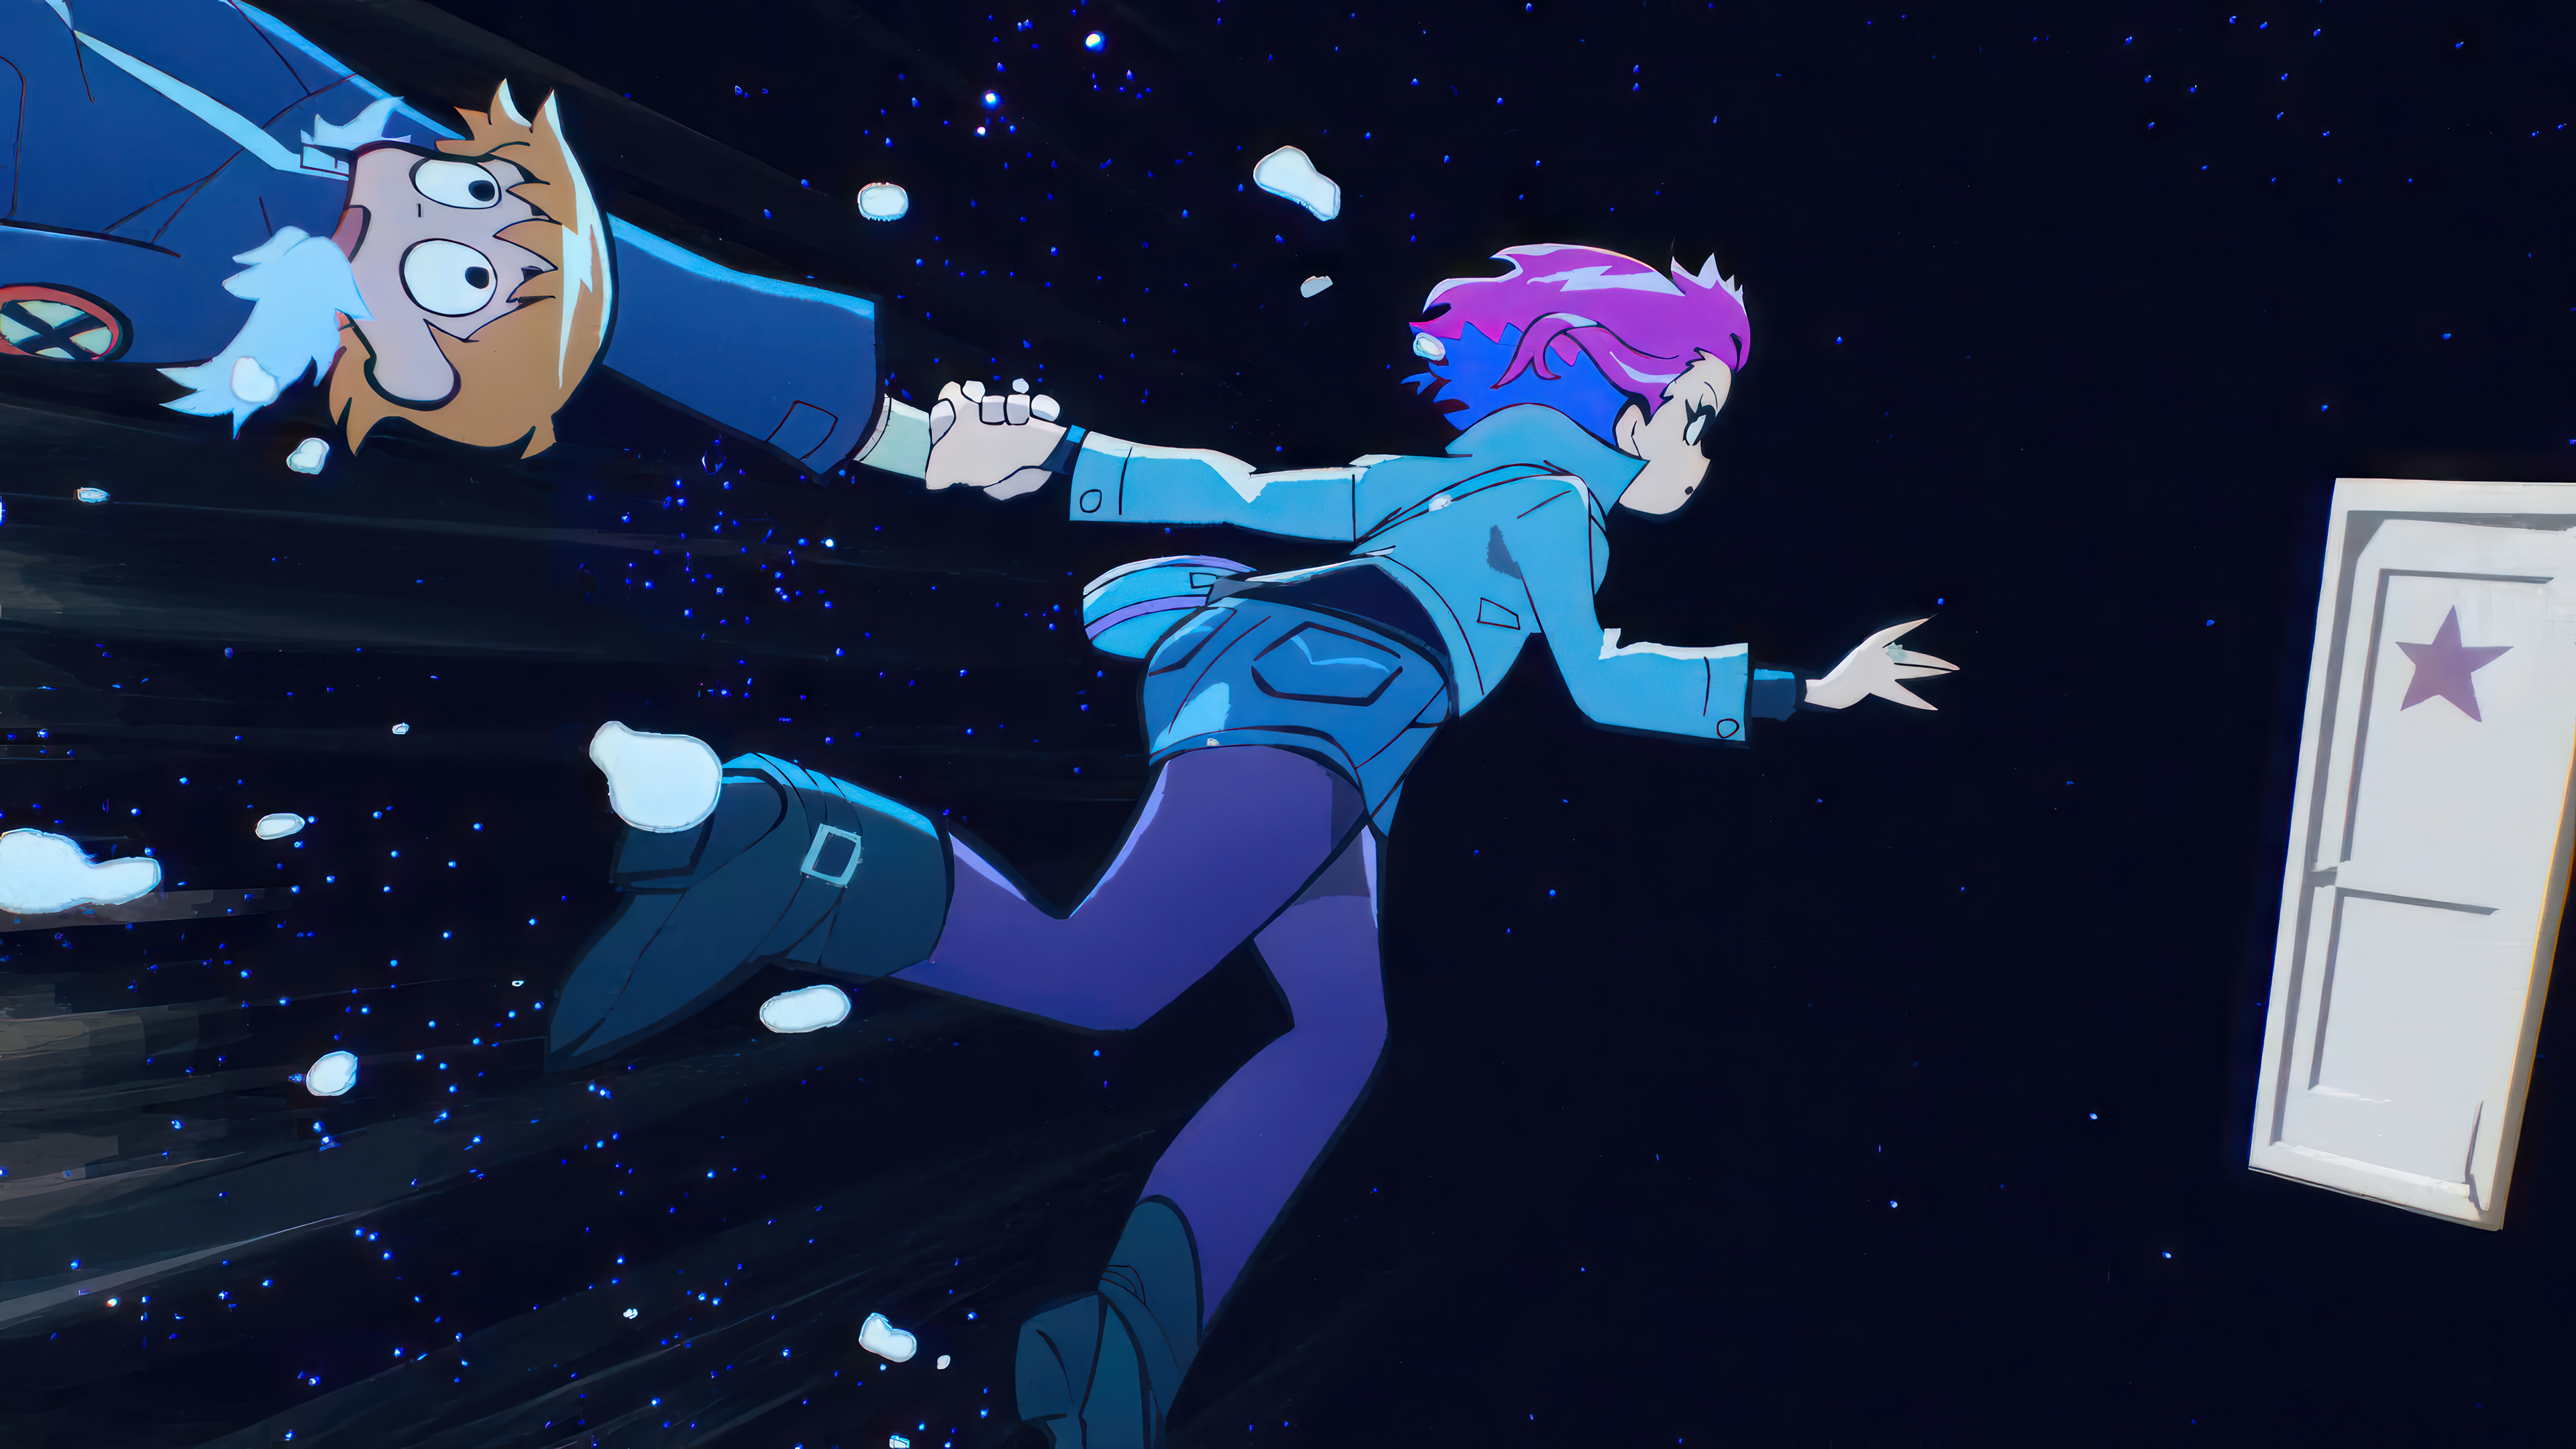 HD wallpaper featuring animated characters Scott Pilgrim and Ramona Flowers in a dynamic pose against a starry backdrop, perfect for Scott Pilgrim fans' desktop backgrounds. #ScottPilgrimTakesOff #RamonaFlowers #DesktopWallpaper